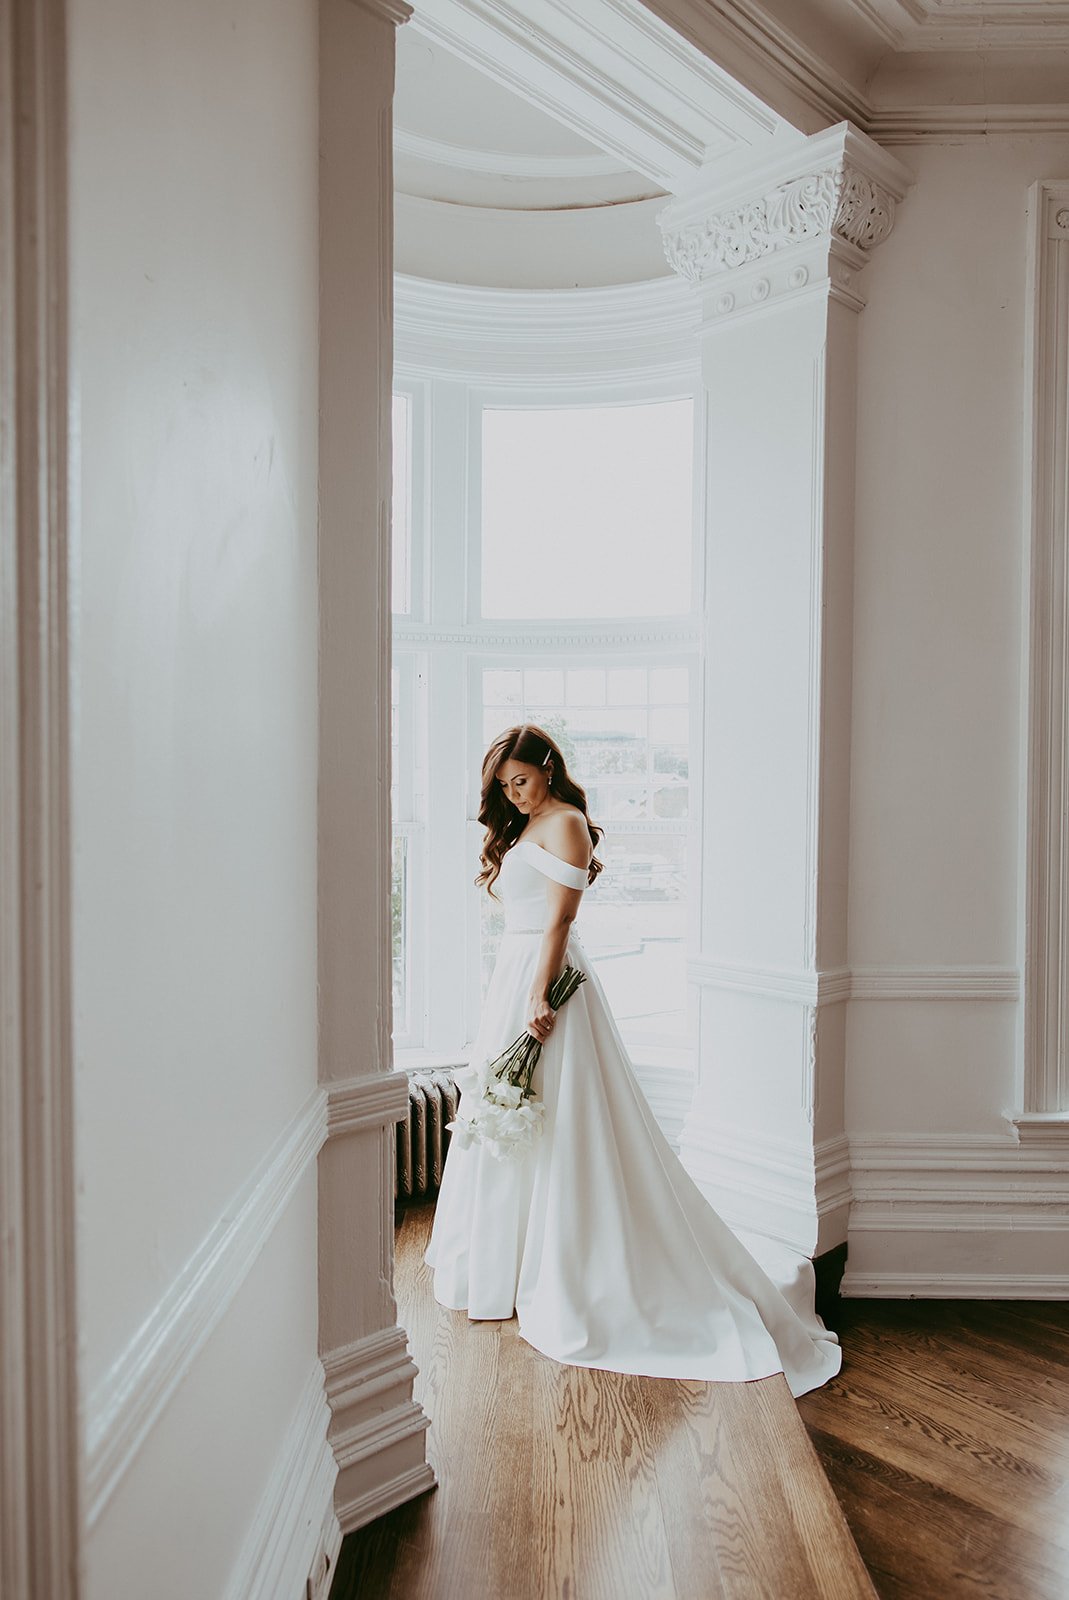 The-Great-Hall-October-Fall-wedding-Queen-West-bridal-portraits-bride.jpg